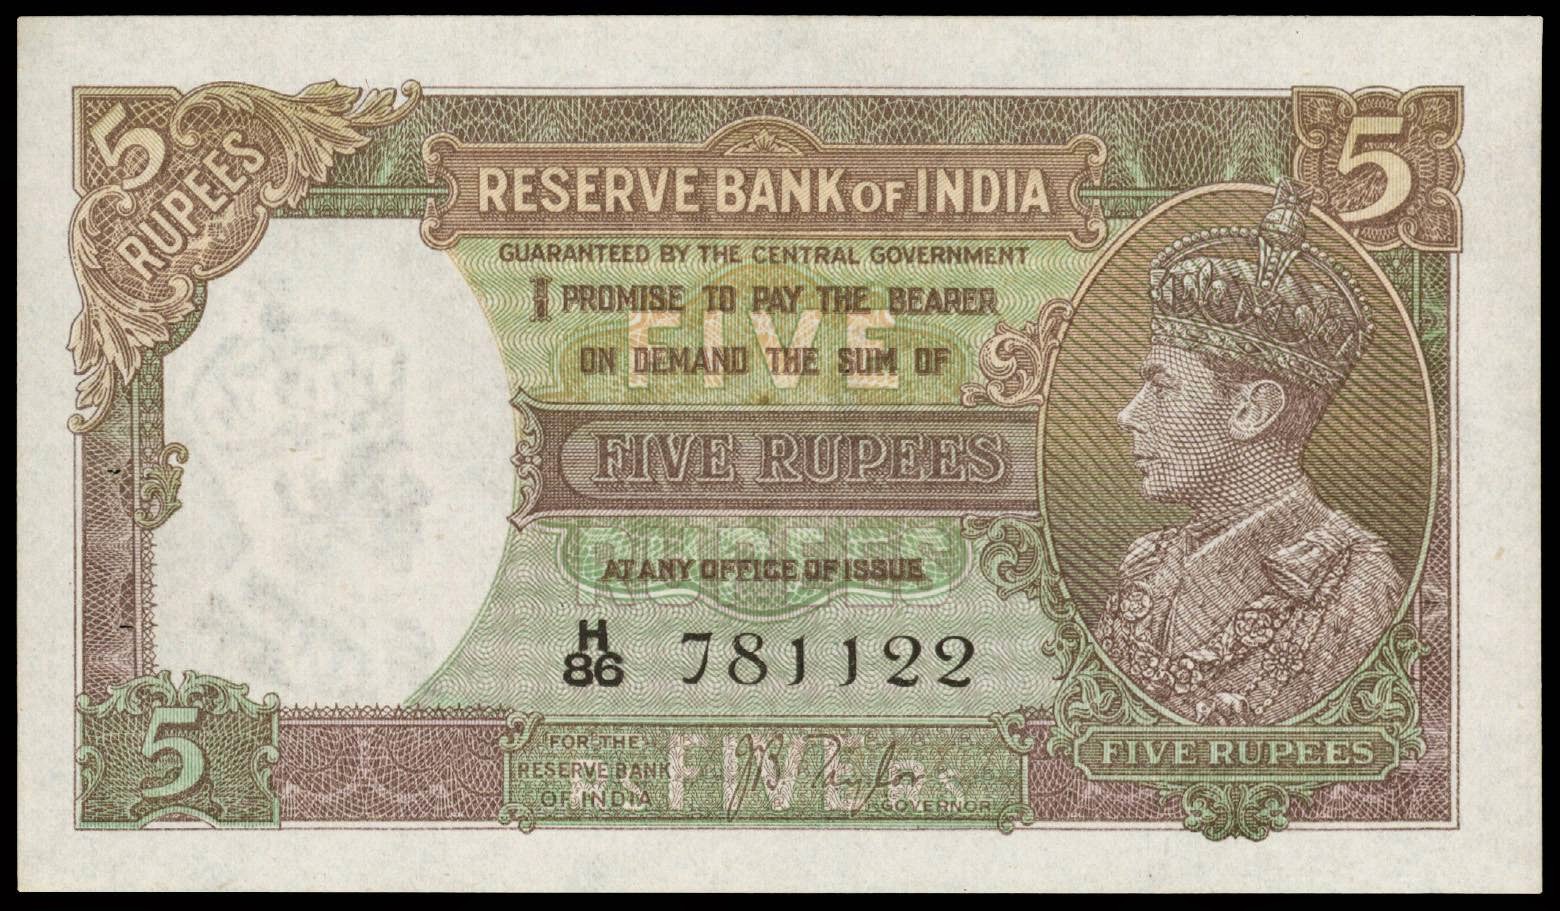 British India Notes 5 Rupees banknote 1938 King George VI in Profile